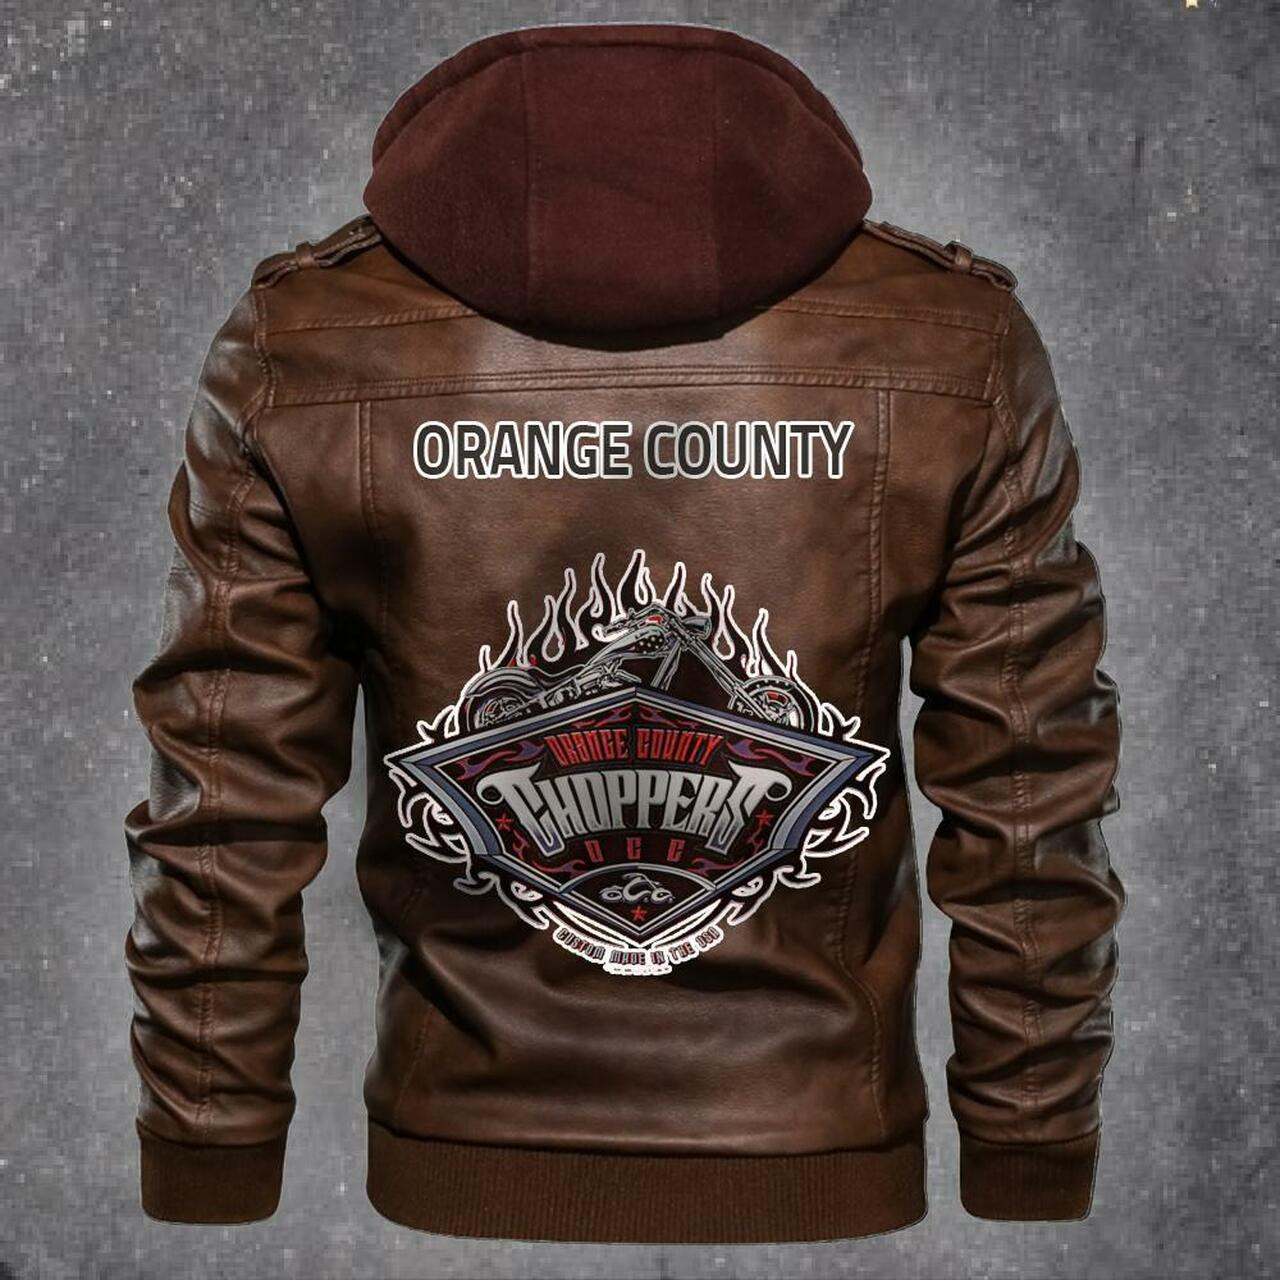 Check out and find the right leather jacket below 225